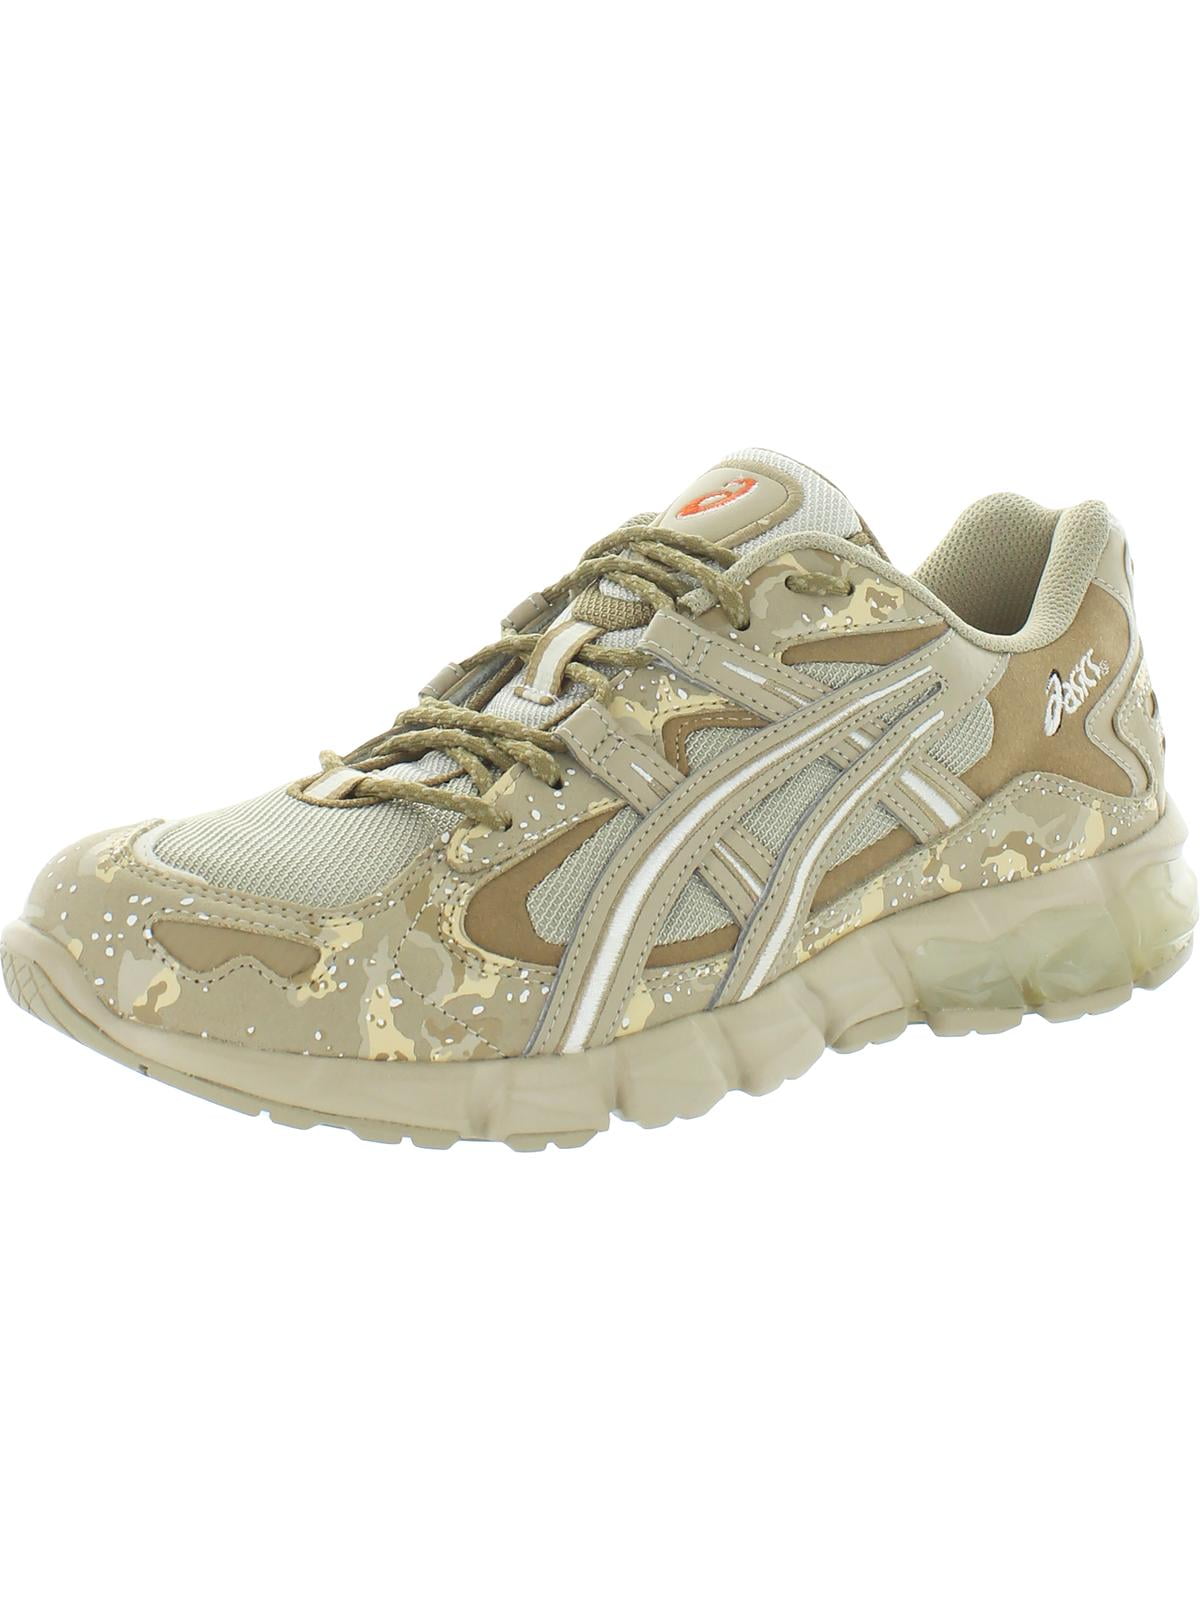 asics camouflage running shoes